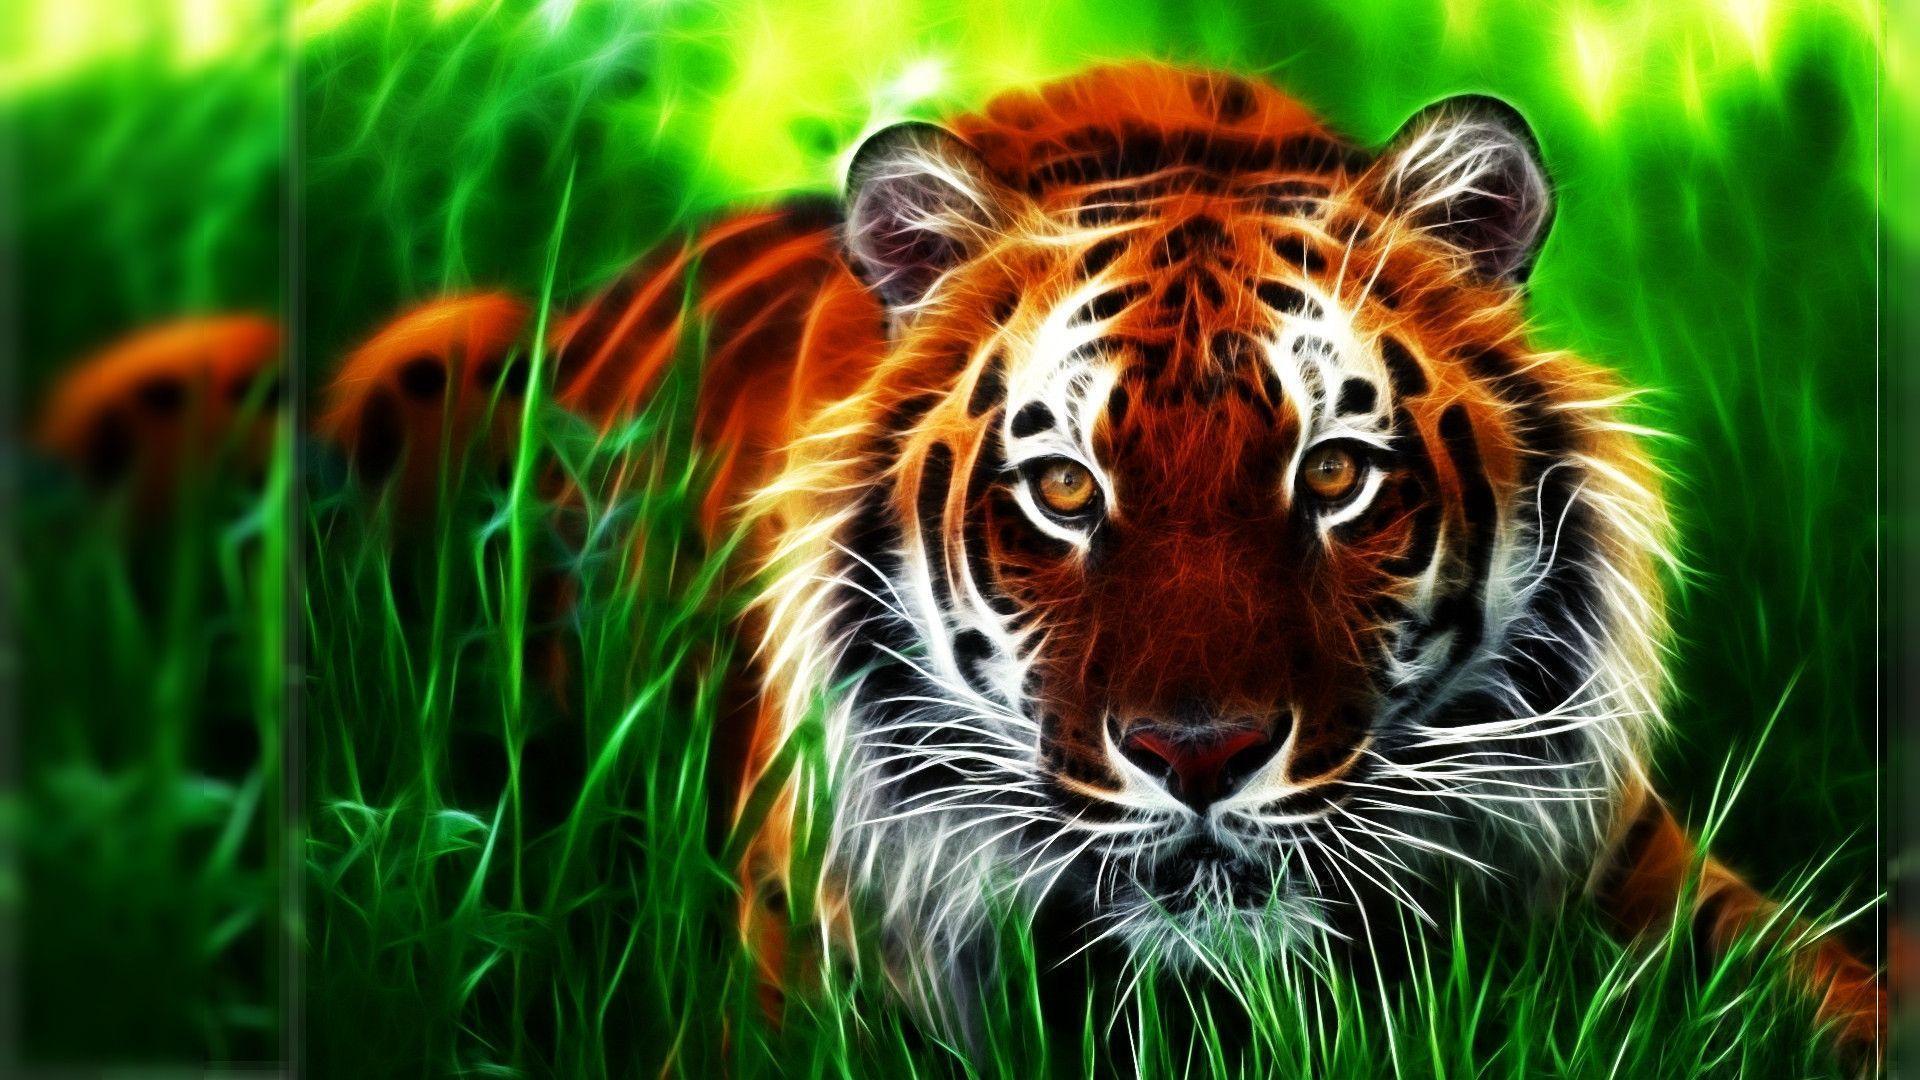 Cool Tiger 3D Wallpaper 2014 for iPhone, Android, Desktop